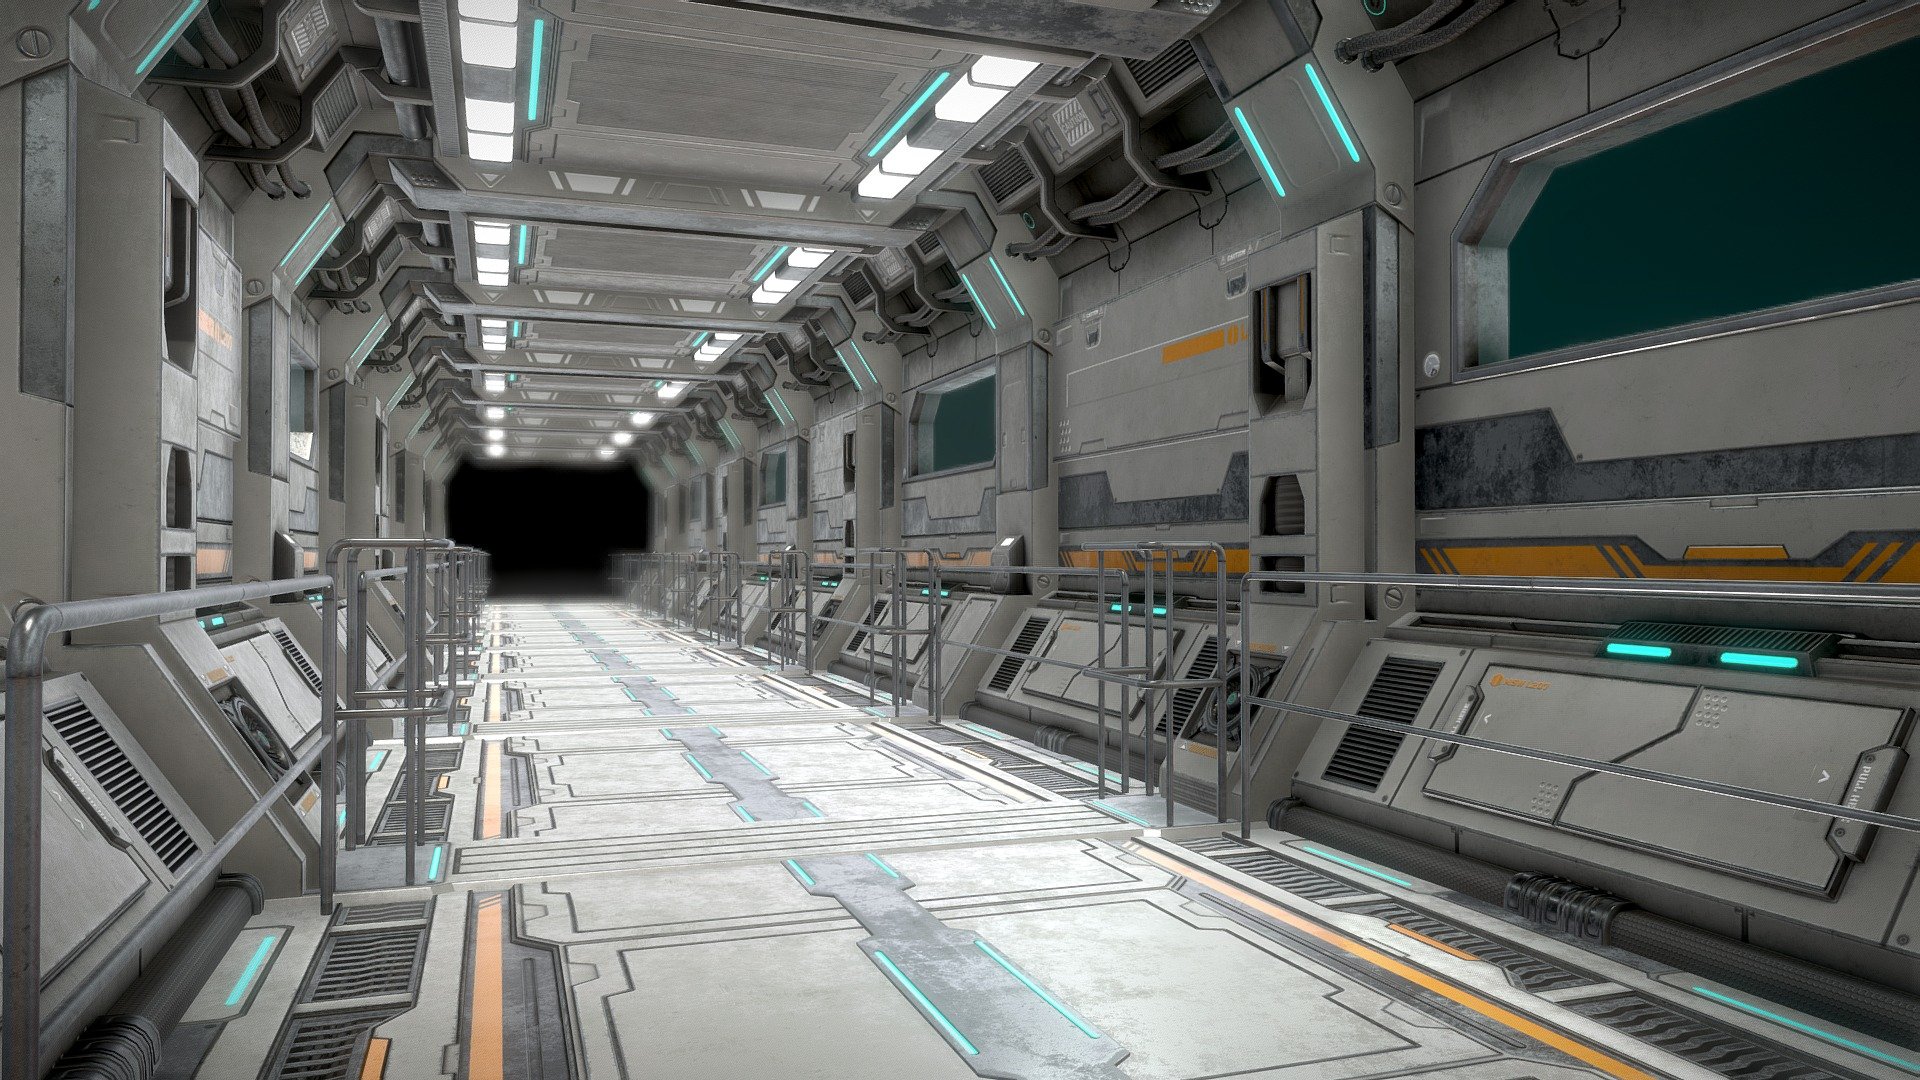 Low Poly Modular Sci-Fi Corridor with PBR textures:




Created with 3ds Max

Textured in Substance Painter

The unit of measurement used for the model is centimeters

4 PBR Materials with 4k textures including: Albedo, Normal, Metalness, Roughness, Occlusion, Emissive, Opacity.

Full set includes:




Wall (with the option of adding panel or window)

Floor

Ceiling

Separator

Separator Ceiling

Separator Floor

Fan (optional, to add to separator)

Railing (also optional)

Polys of parts: 2.106 (4.140 tris).
Polys of scene: 26.224 (51.760 tris)

Files included:




Sci-Fi Modular Corridor_corridor: Full scene

Sci-Fi Modular Corridor_section: Section of shwon corridor to duplicate/instance

Sci-Fi Modular Corridor_parts: All parts separated to build your own corridor

Formats included: MAX / BLEND / FBX / OBJ / 3DS

Model also available including door

This model can be used for any game, personal project, etc. You may not resell any content - Sci-Fi Modular Corridor Version 2 - Low Poly - Buy Royalty Free 3D model by MSWoodvine 3d model